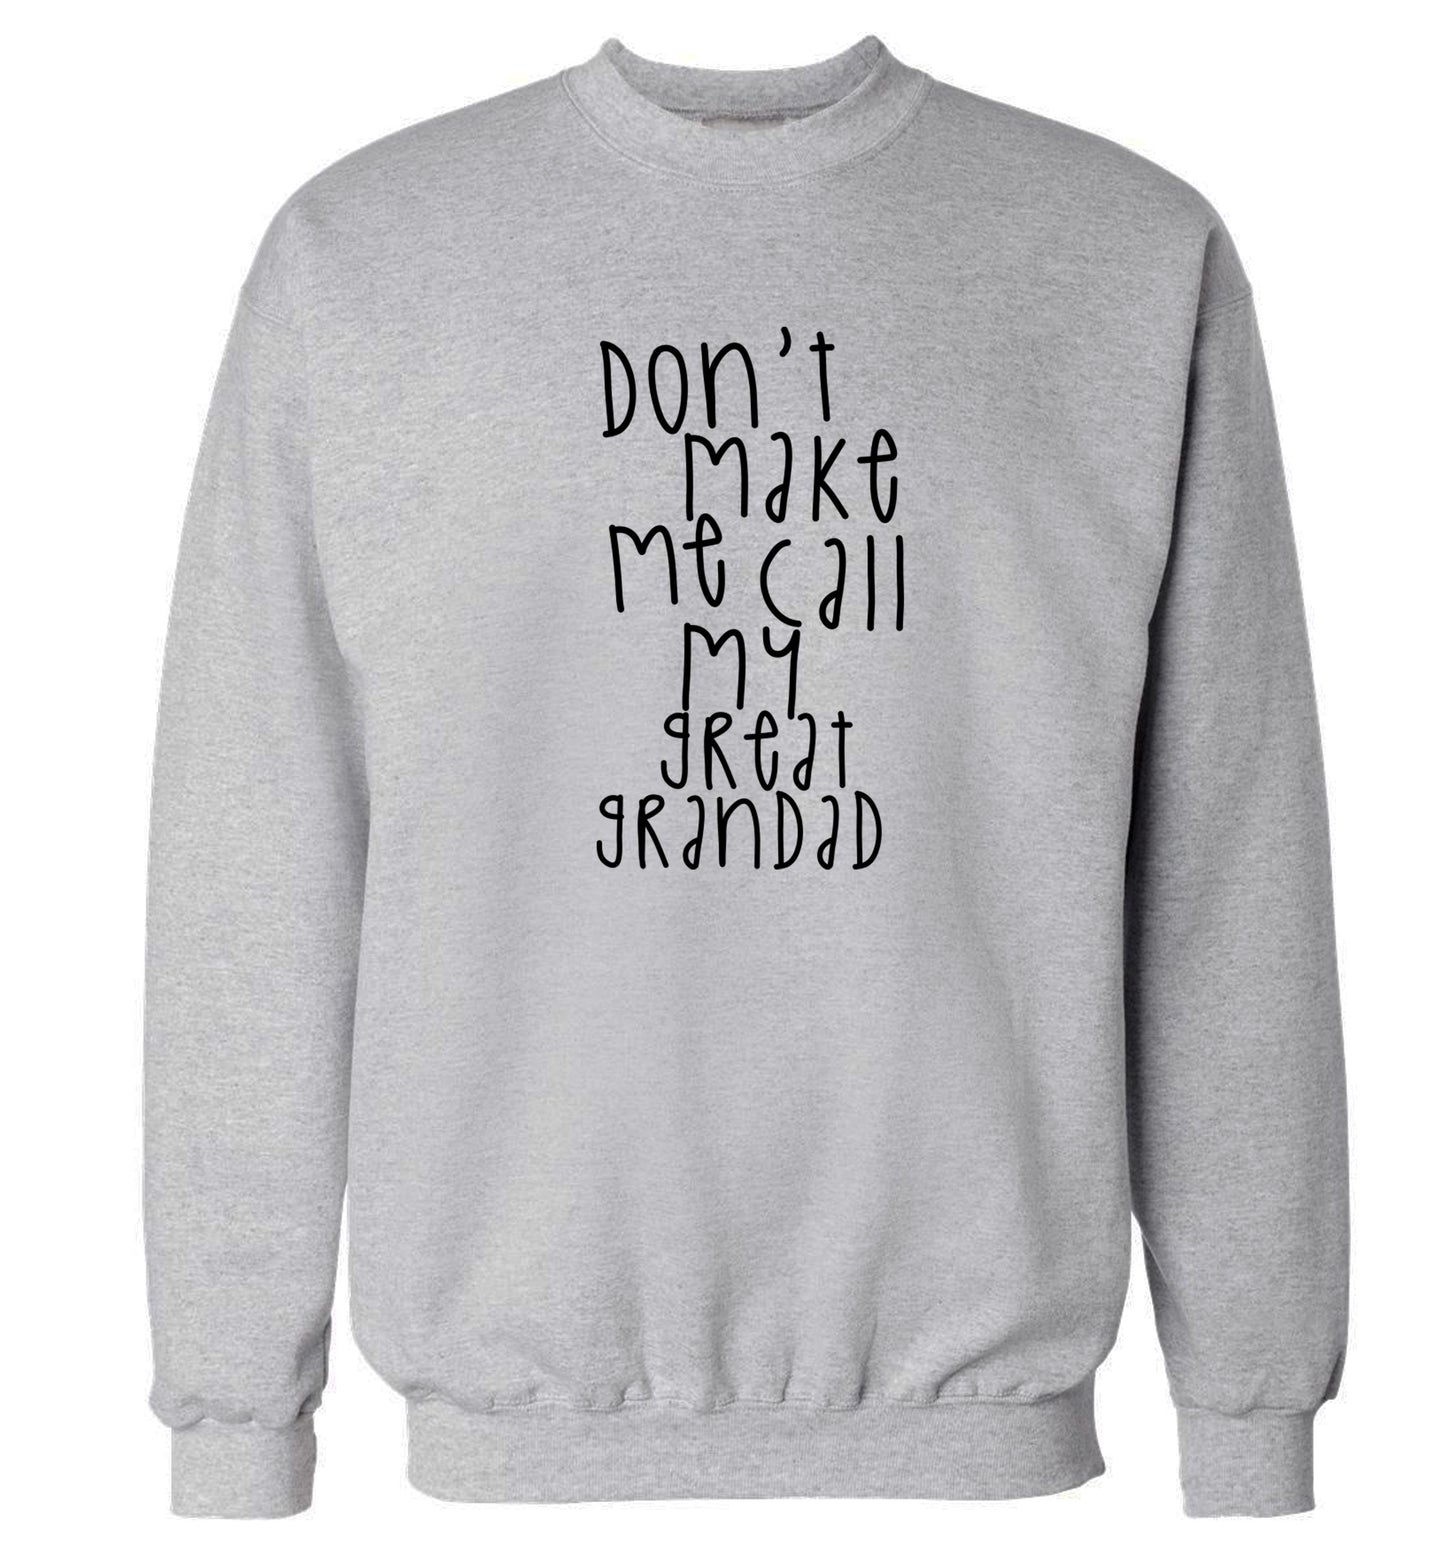 Don't make me call my great grandad Adult's unisex grey Sweater 2XL